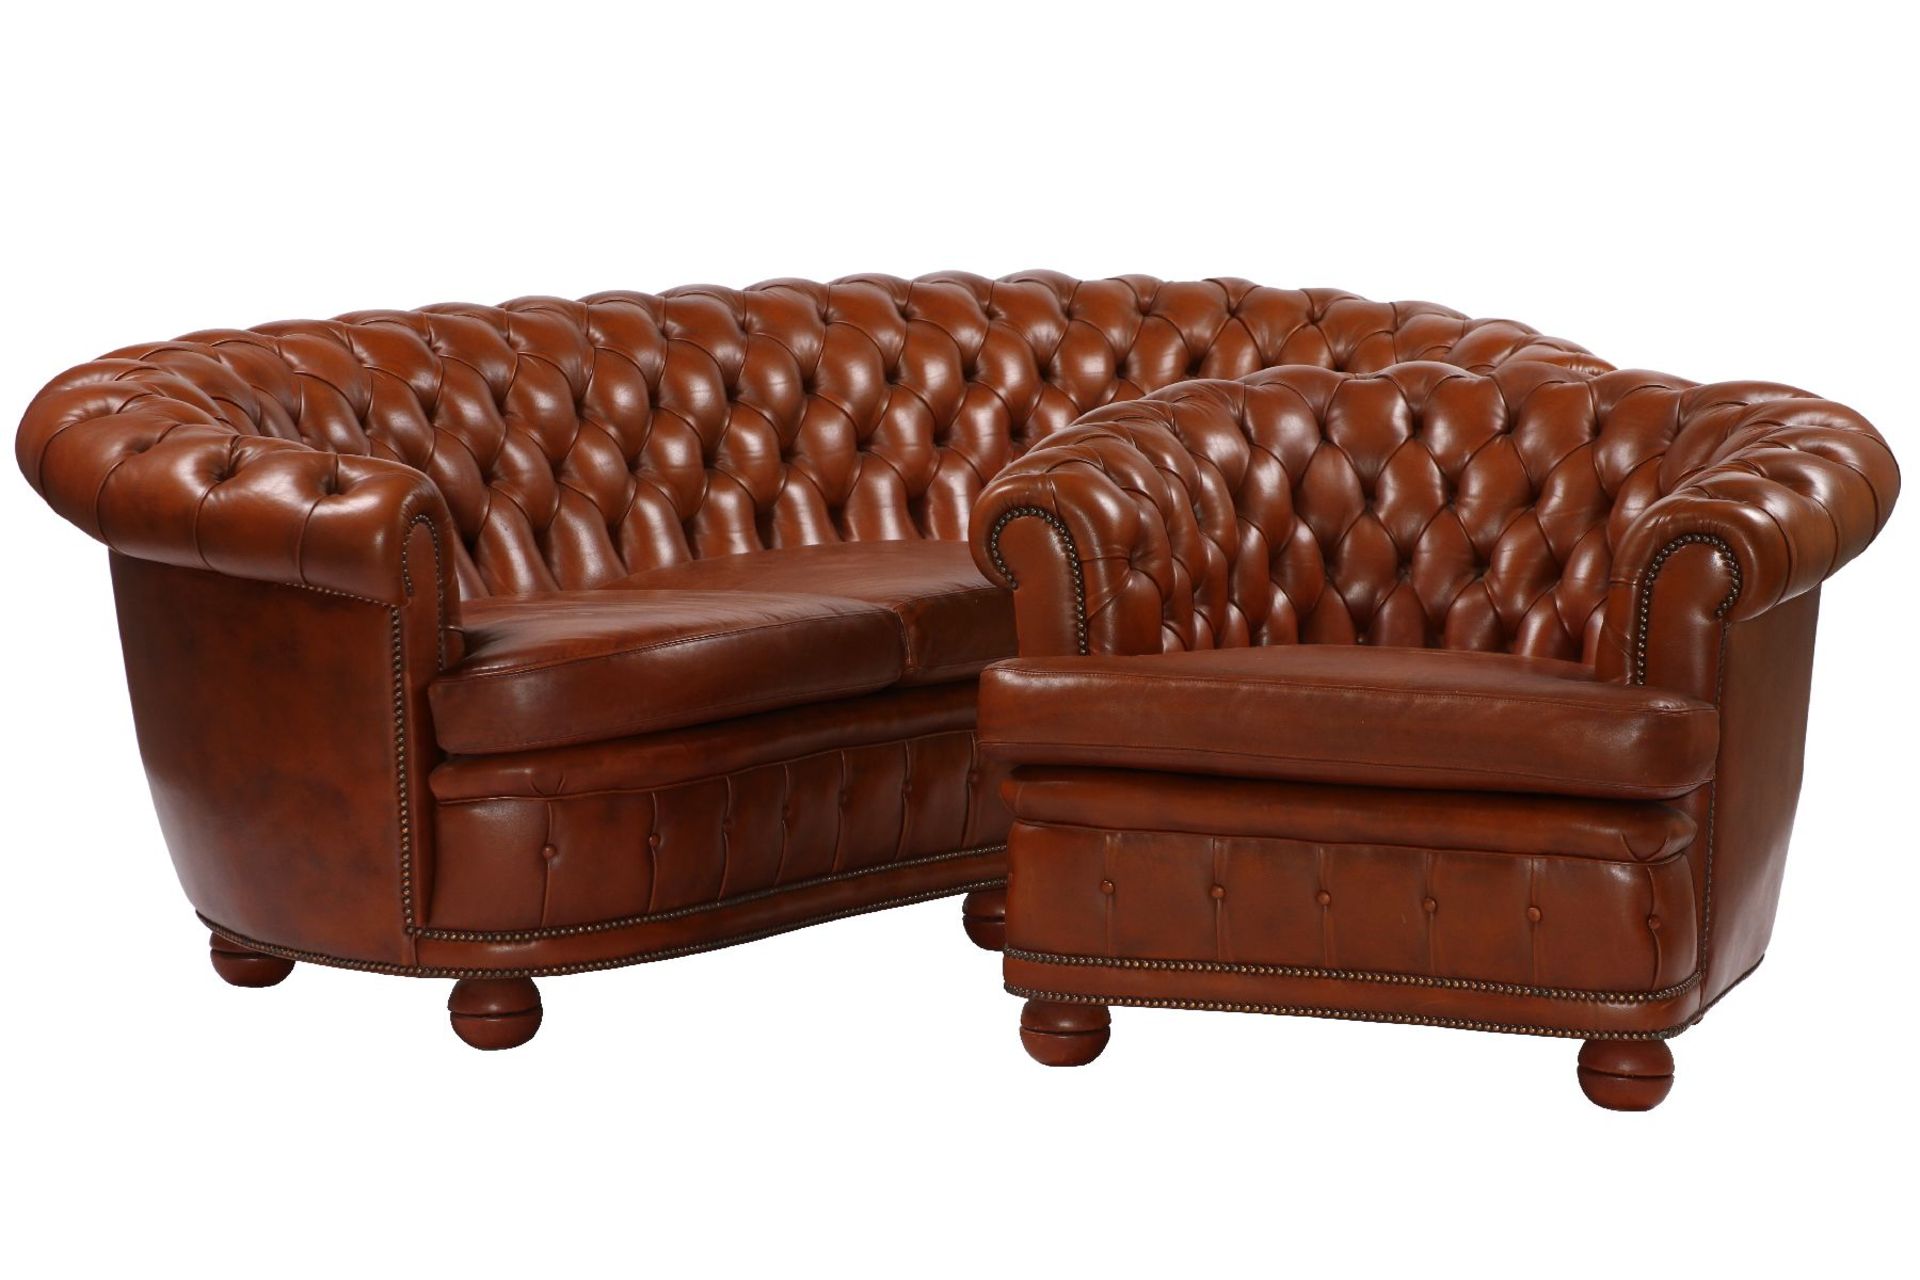 3-seater sofa and 2 armchairs, in Chesterfieldstyle, brown leather covers of very good quality,